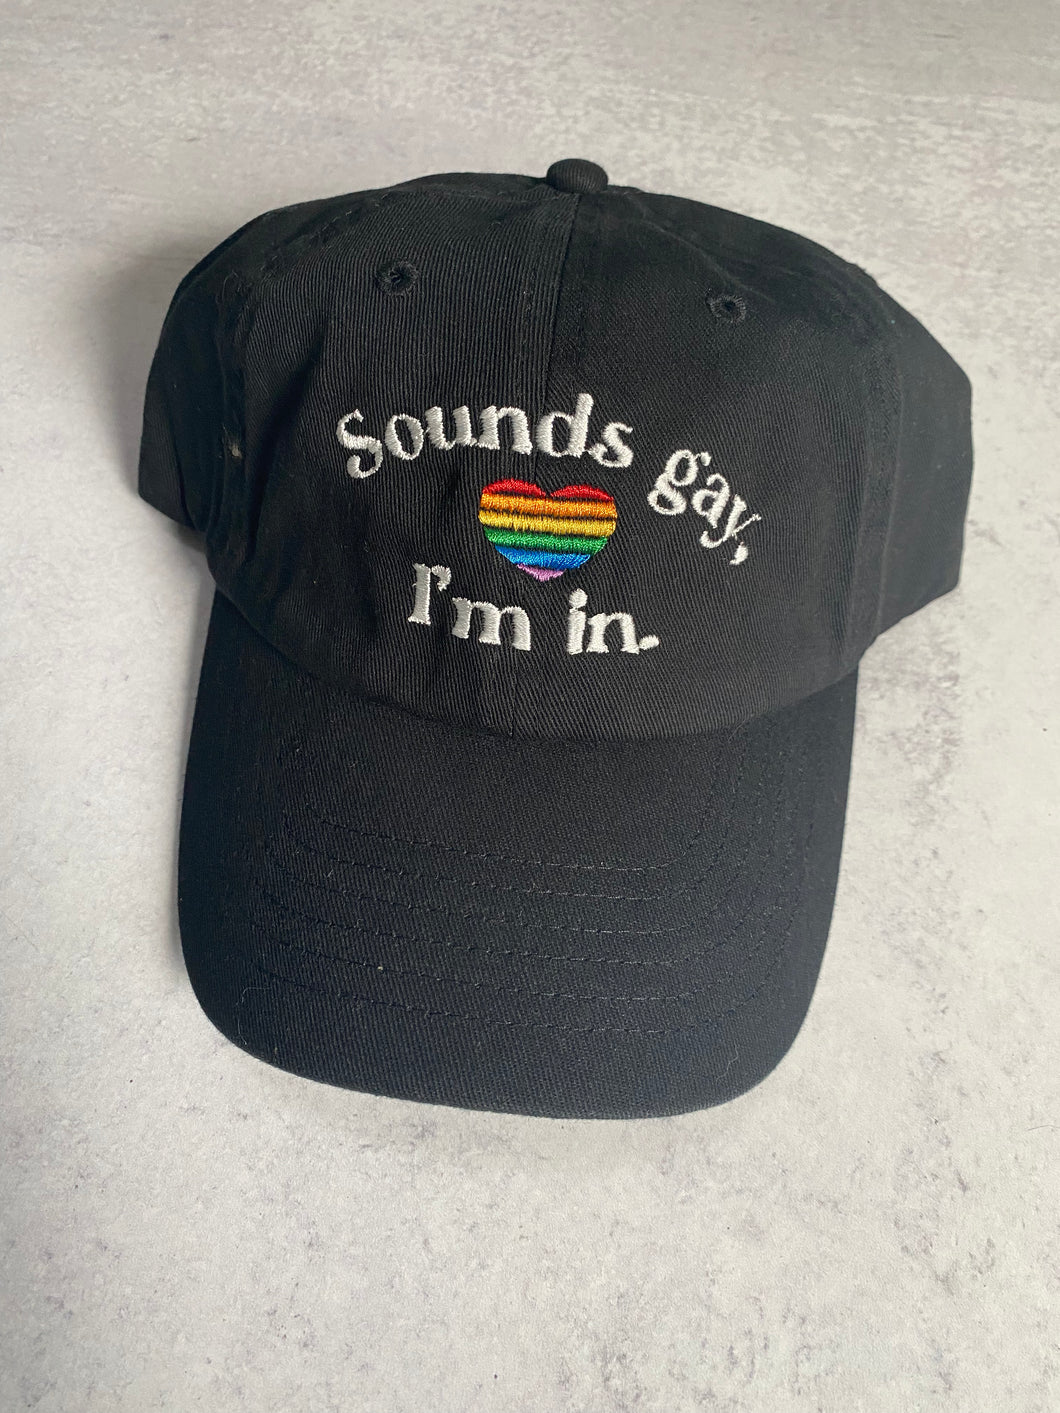 Sounds Gay, I’m in. Pride Hat